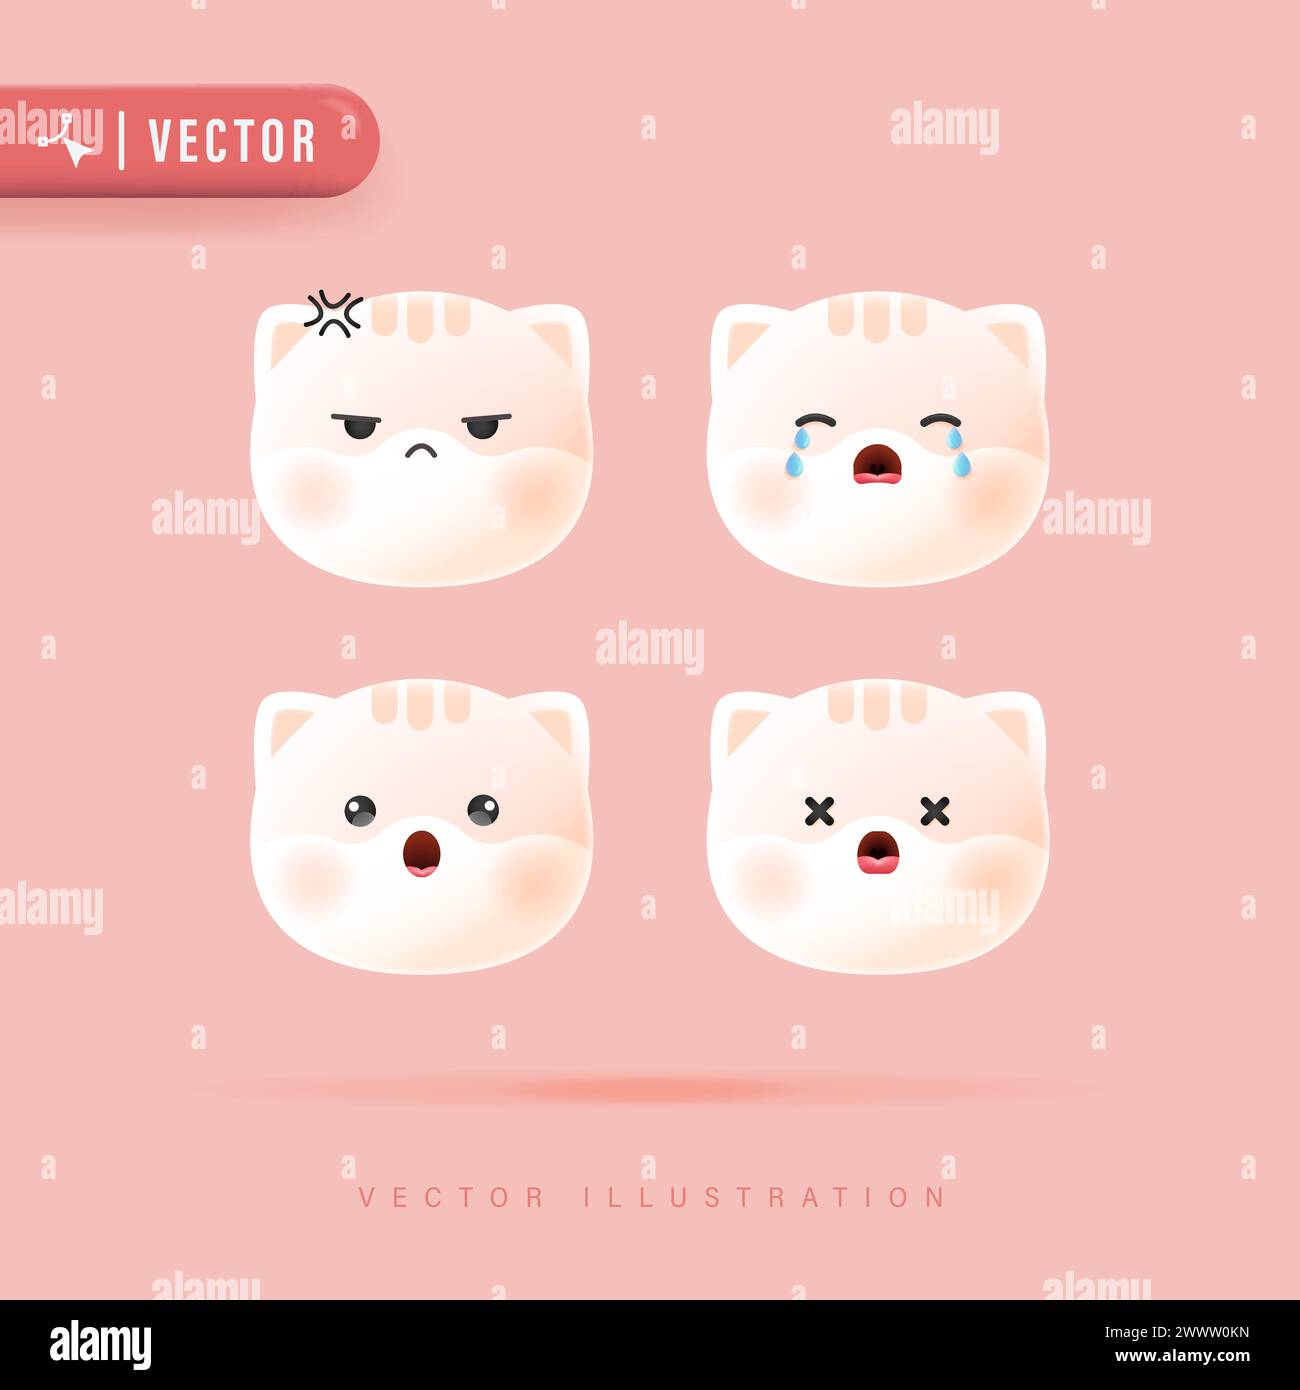 3D Realistic Vector Set Of Cute Cartoon Cat Icons with Various Facial Expression Isolated in Peach Background. Simple and Minimal Kitty Face Icon Set Stock Vector